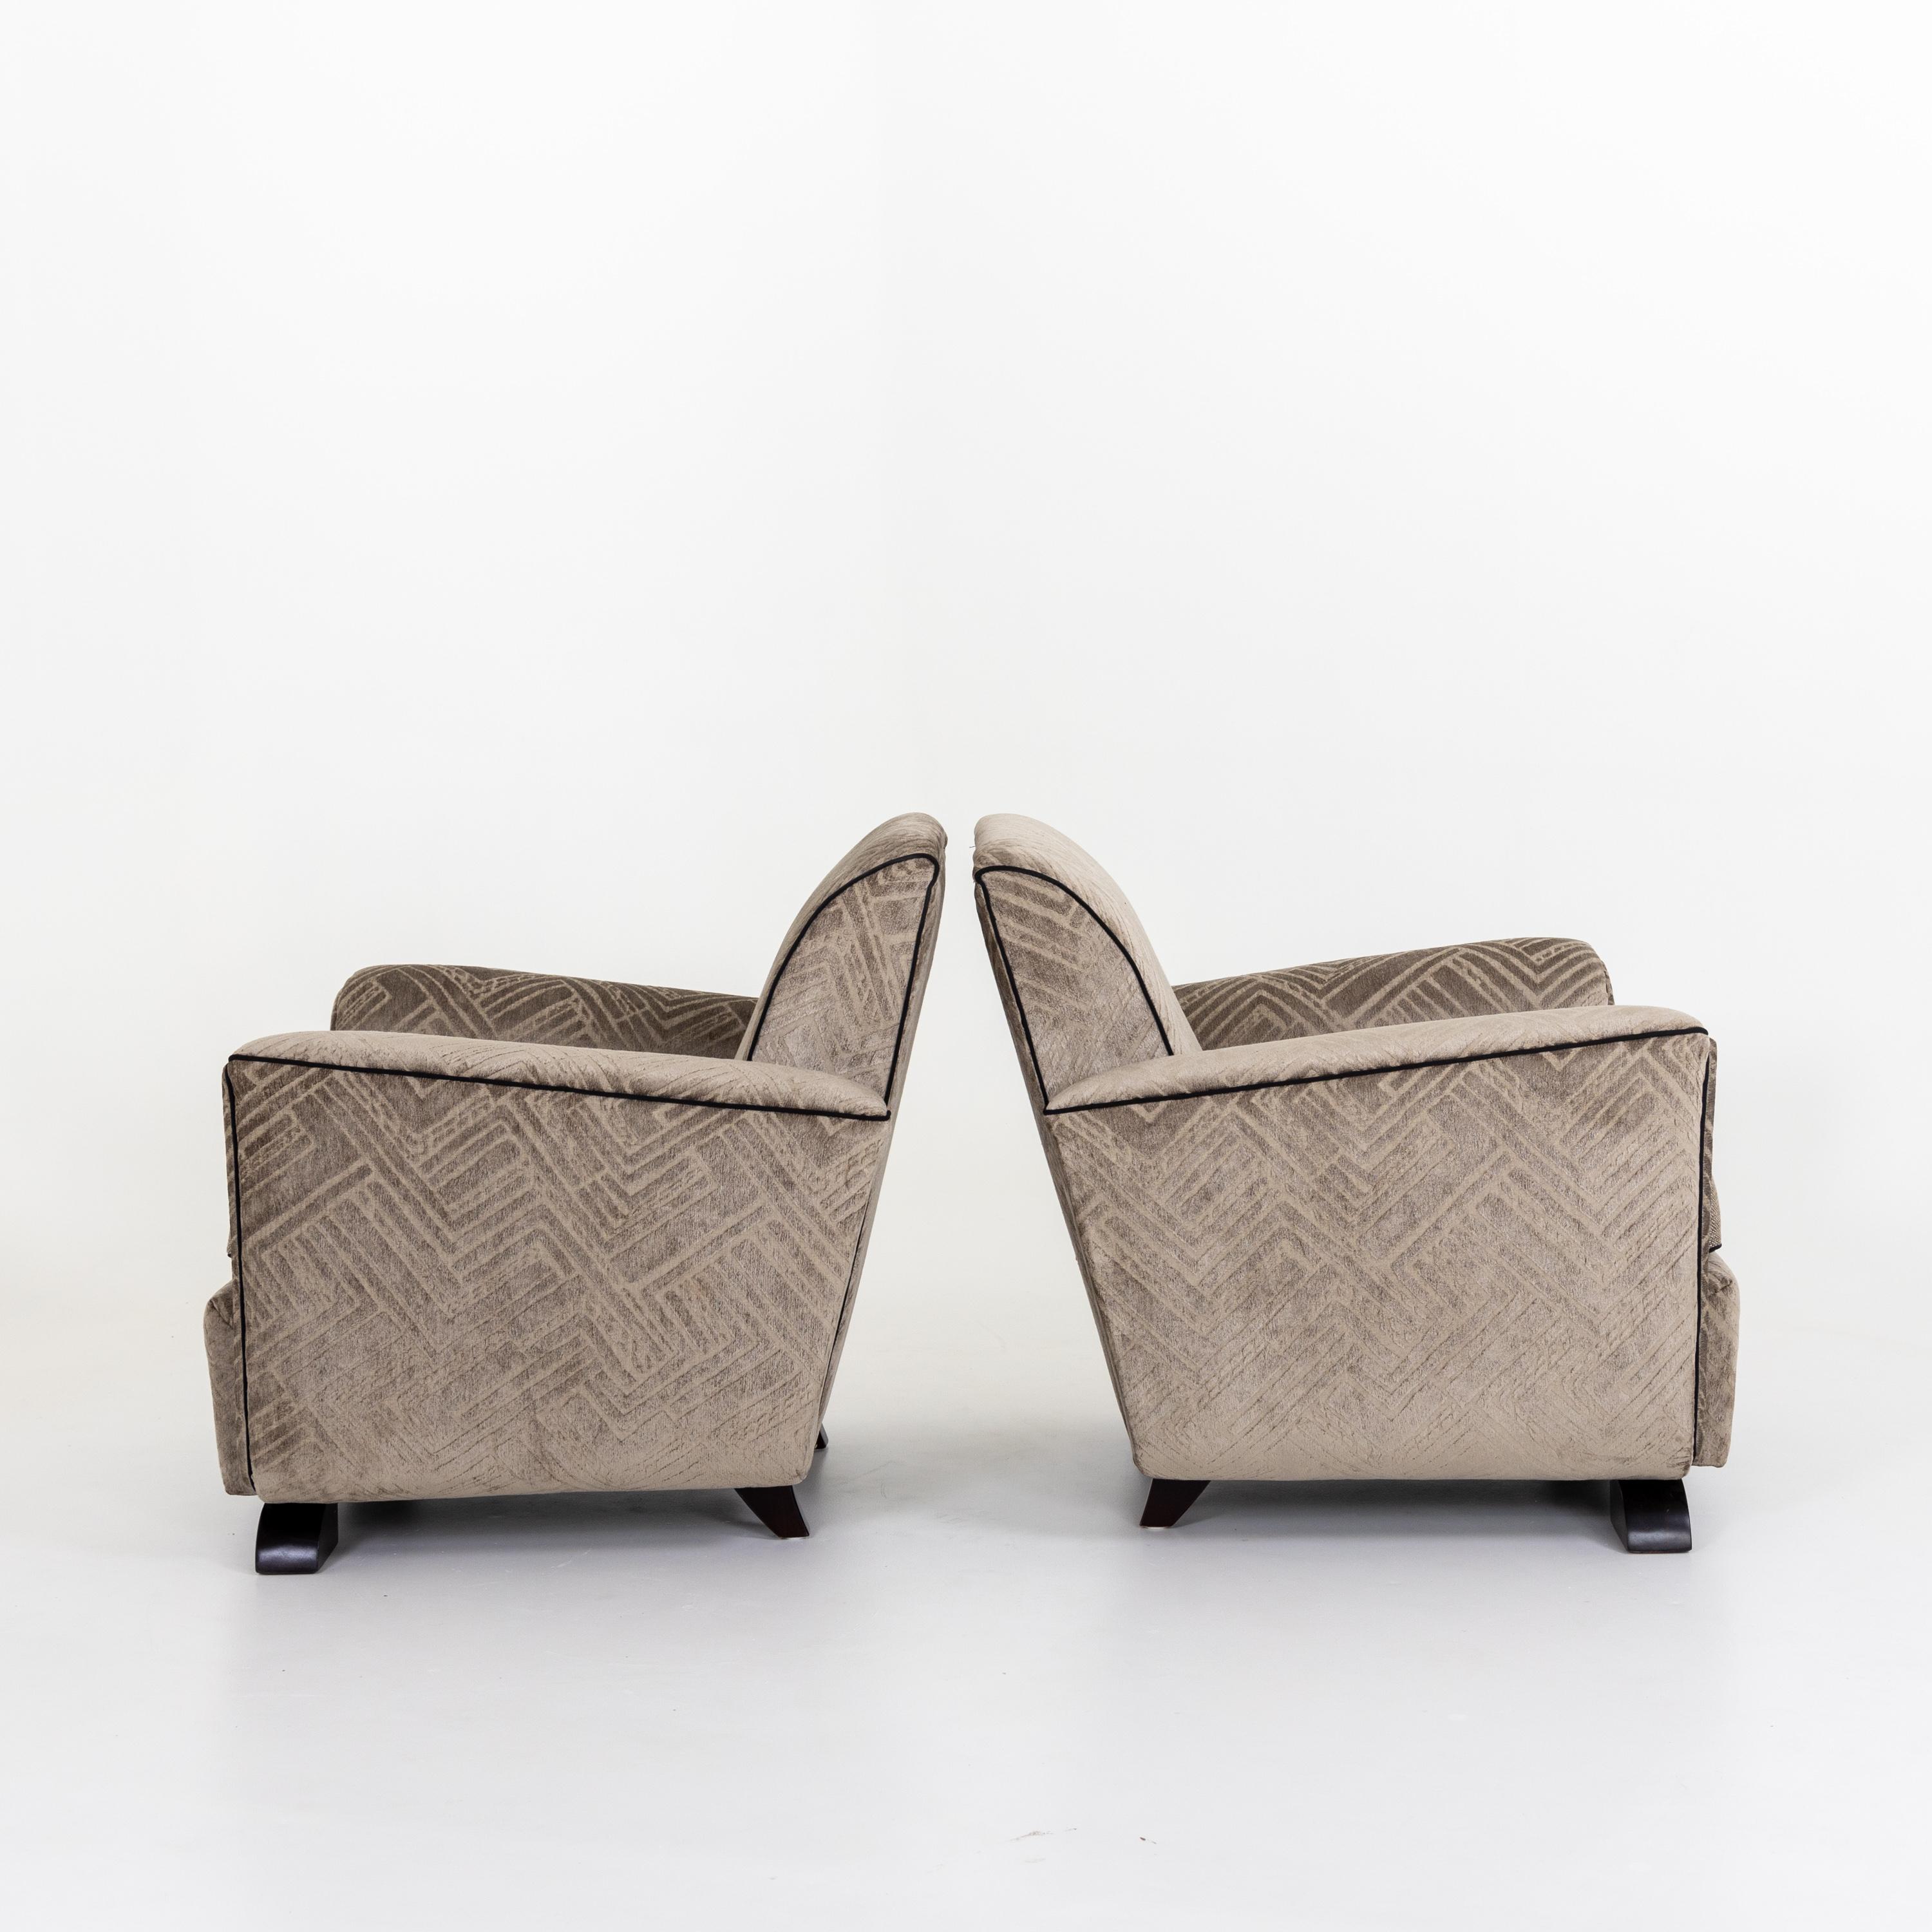 Early 20th Century Pair of Art Deco Lounge Chairs, France, 1920s For Sale